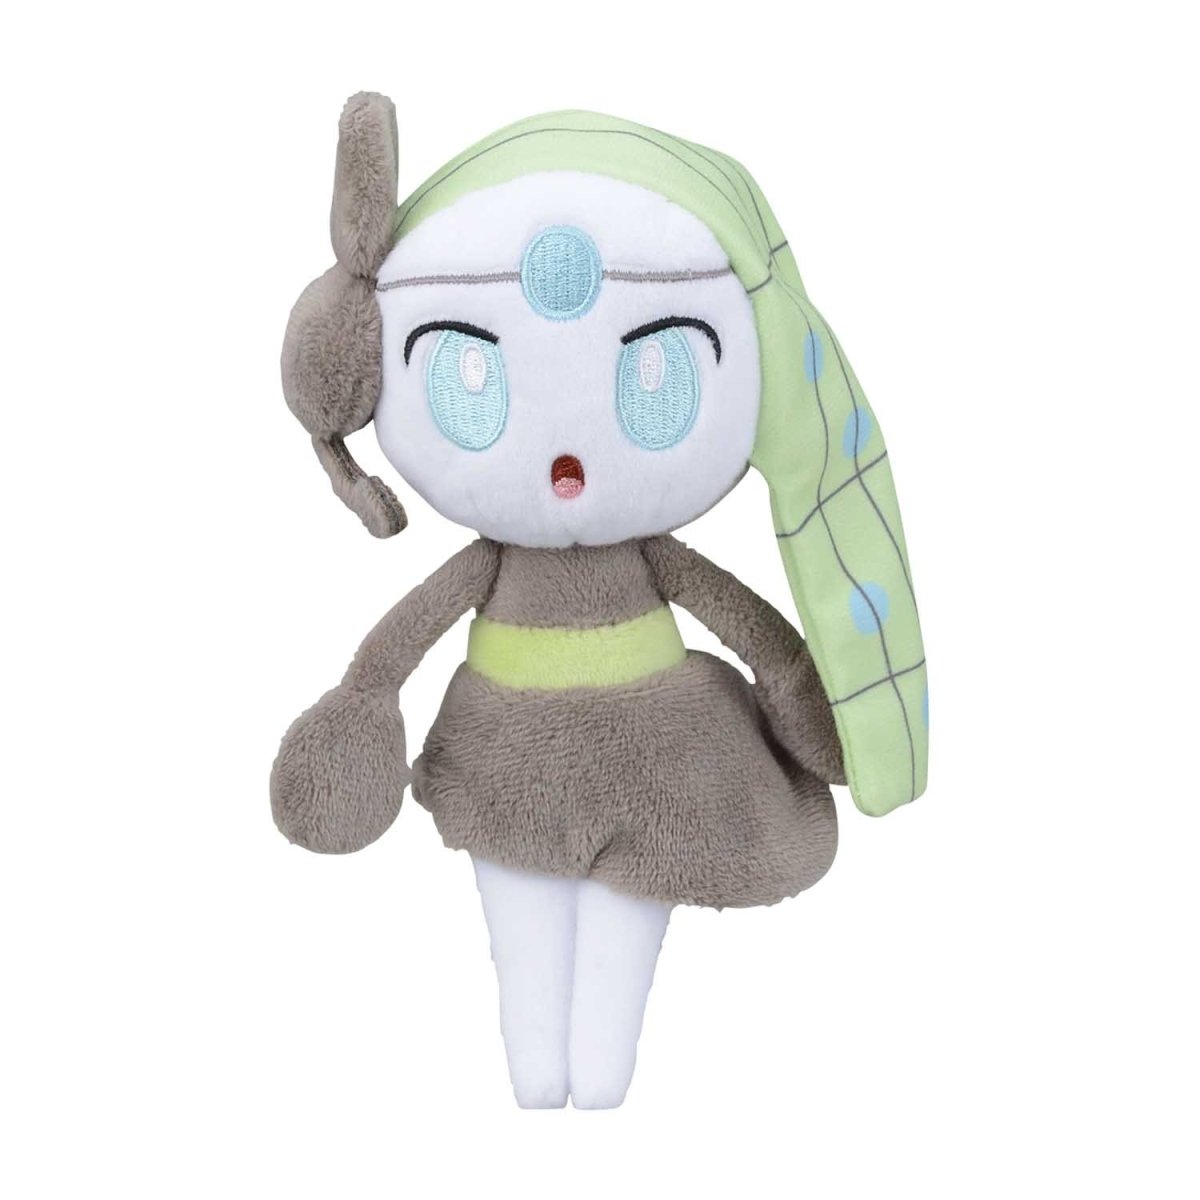 Meloetta Makes a Perfect Case for Real-Time Form Switching in Pokemon GO